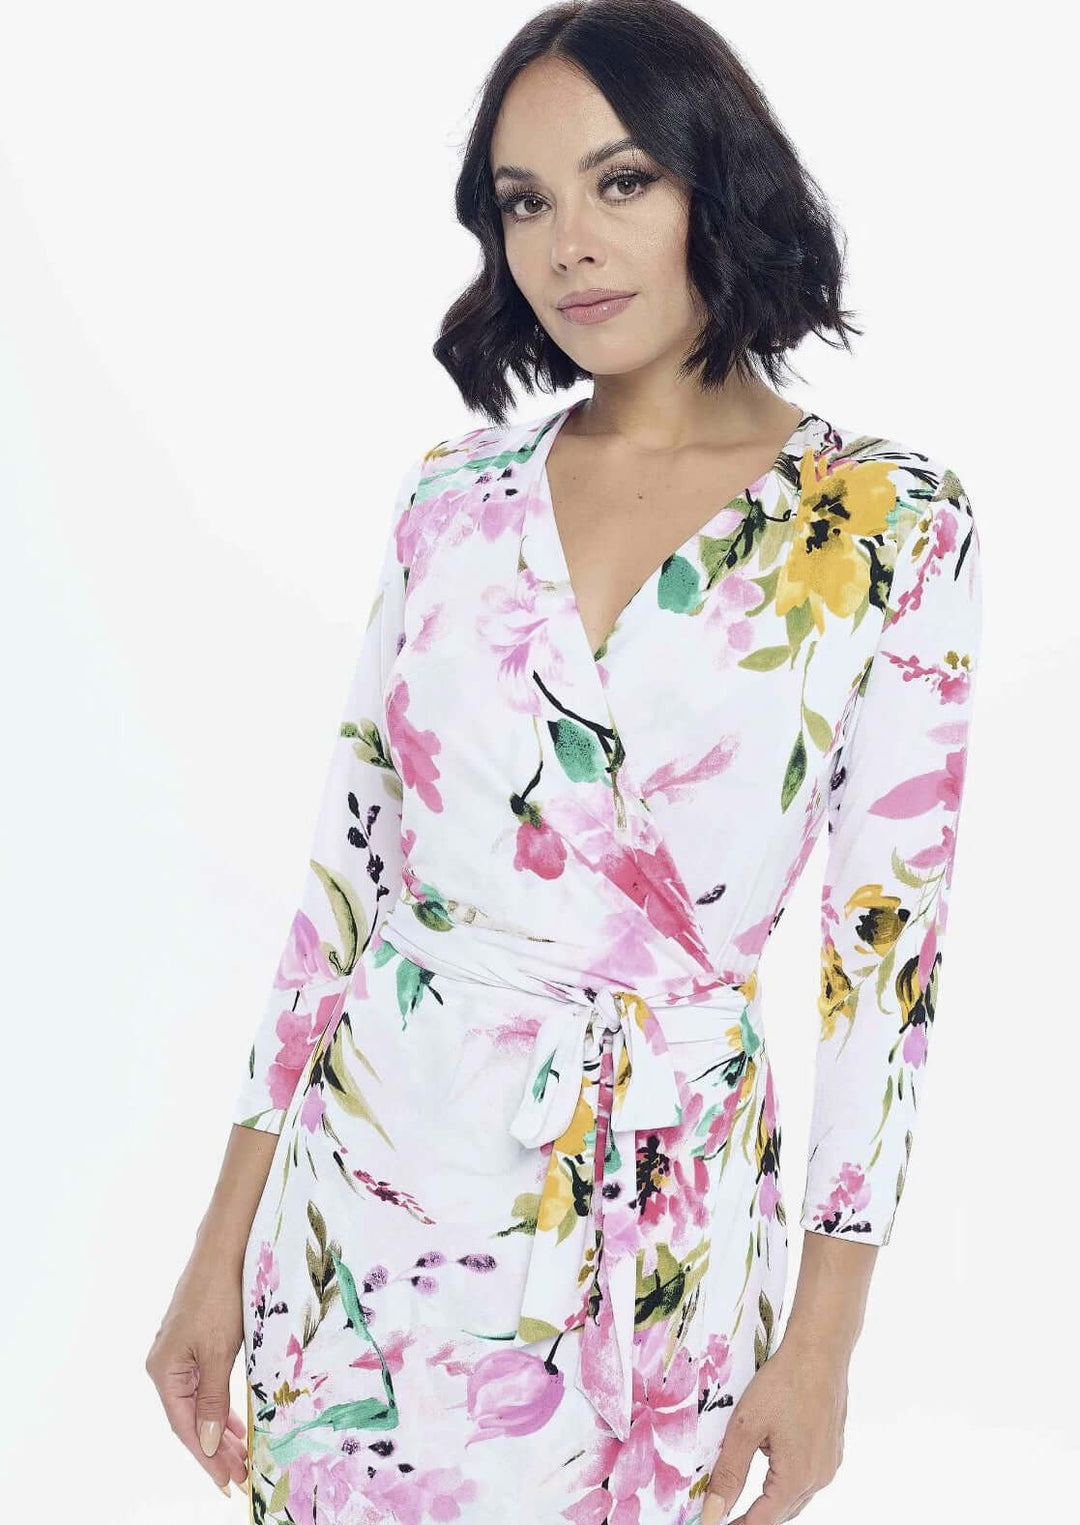 Beautiful Ladies White & Pink Floral Print Jersey Midi Wrap Dress with 3/4 Sleeves | Renee C. Style #4329DR2 | Proudly Made in USA | Classy Cozy Cool Clothing Boutique